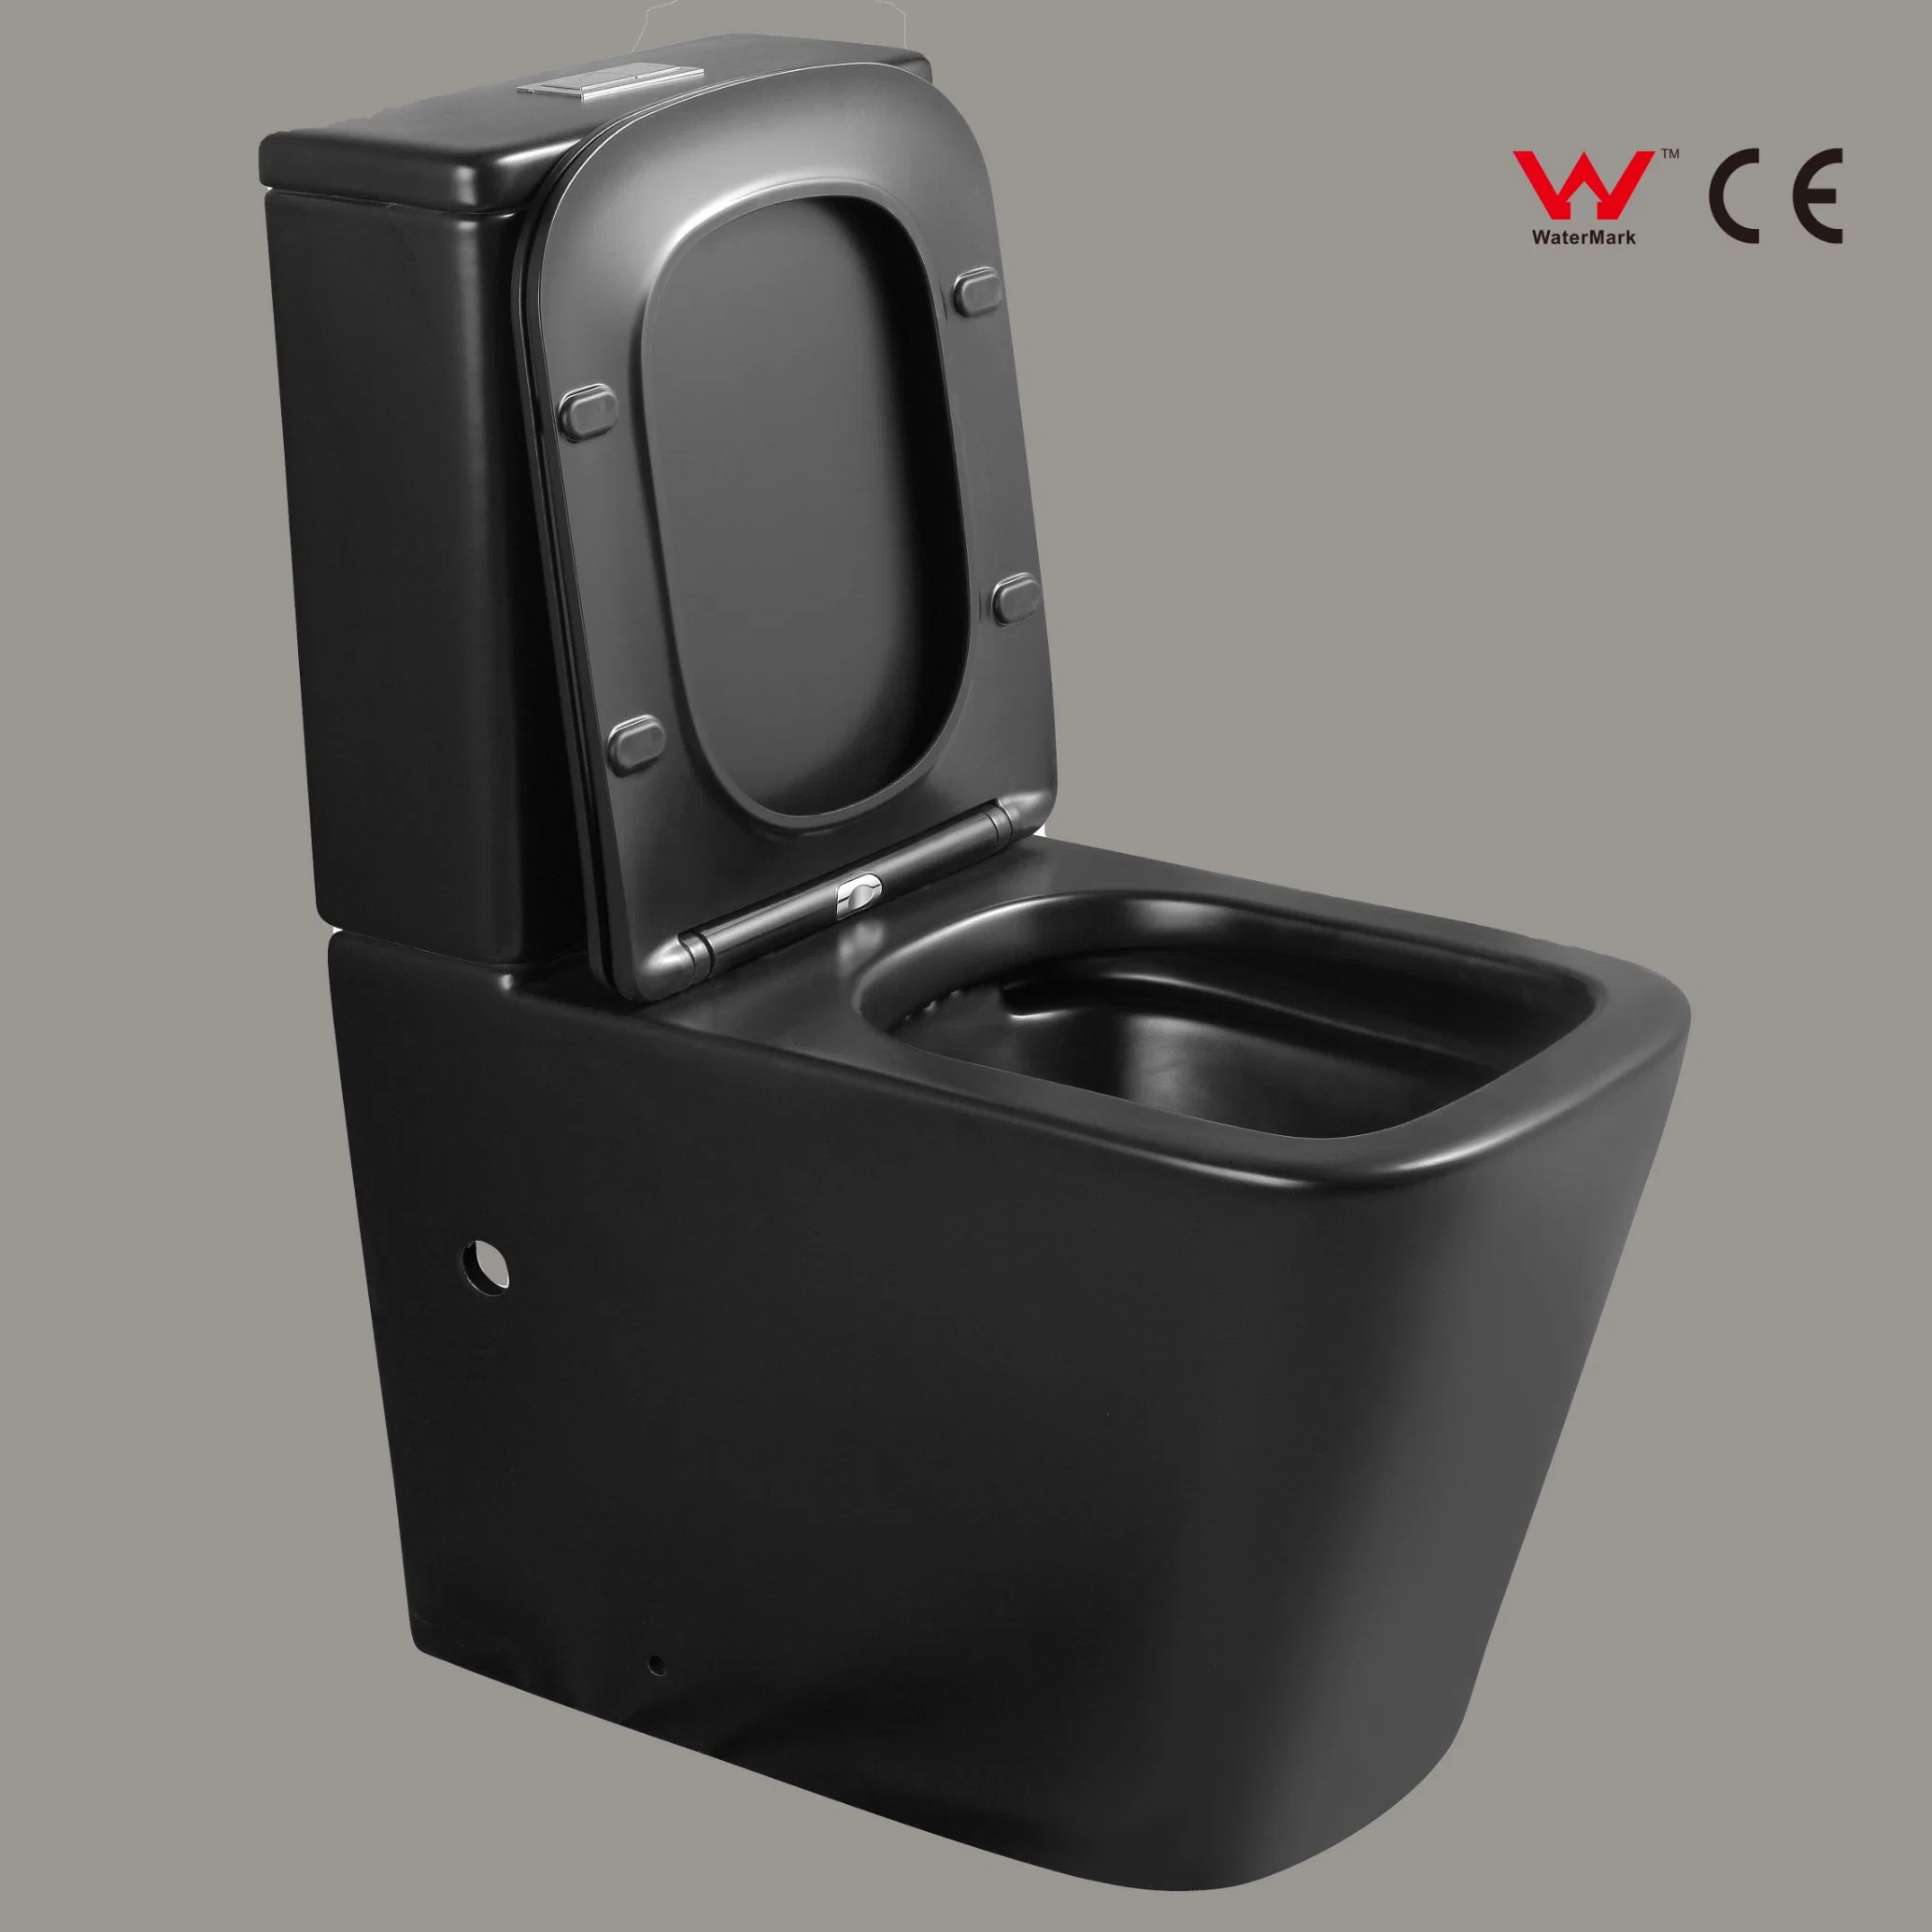 CE Watermark Two Piece Closestool Rimless Siphonic Matte Black Wc Bowl Toilet